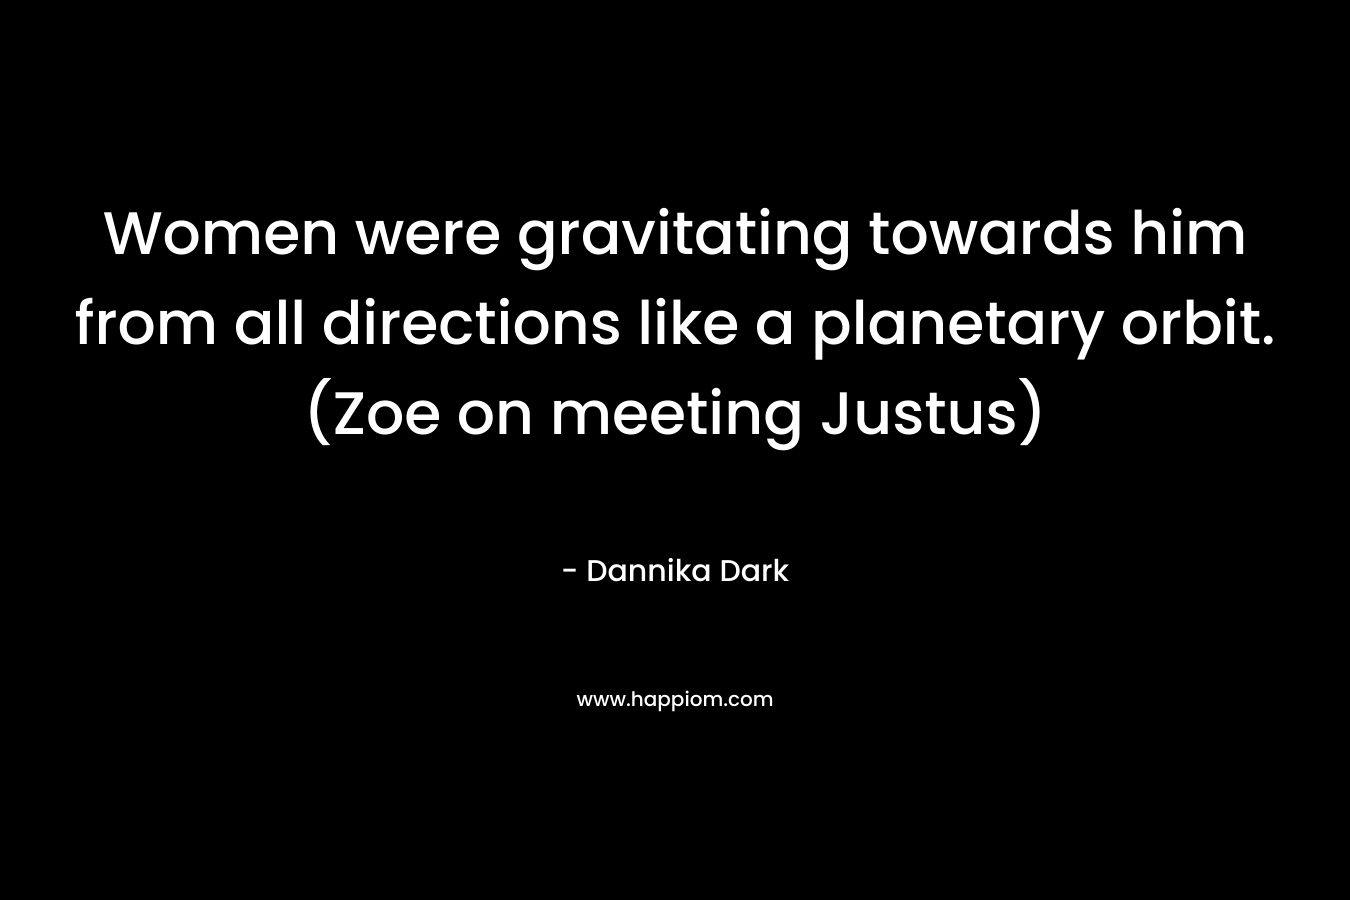 Women were gravitating towards him from all directions like a planetary orbit.(Zoe on meeting Justus)